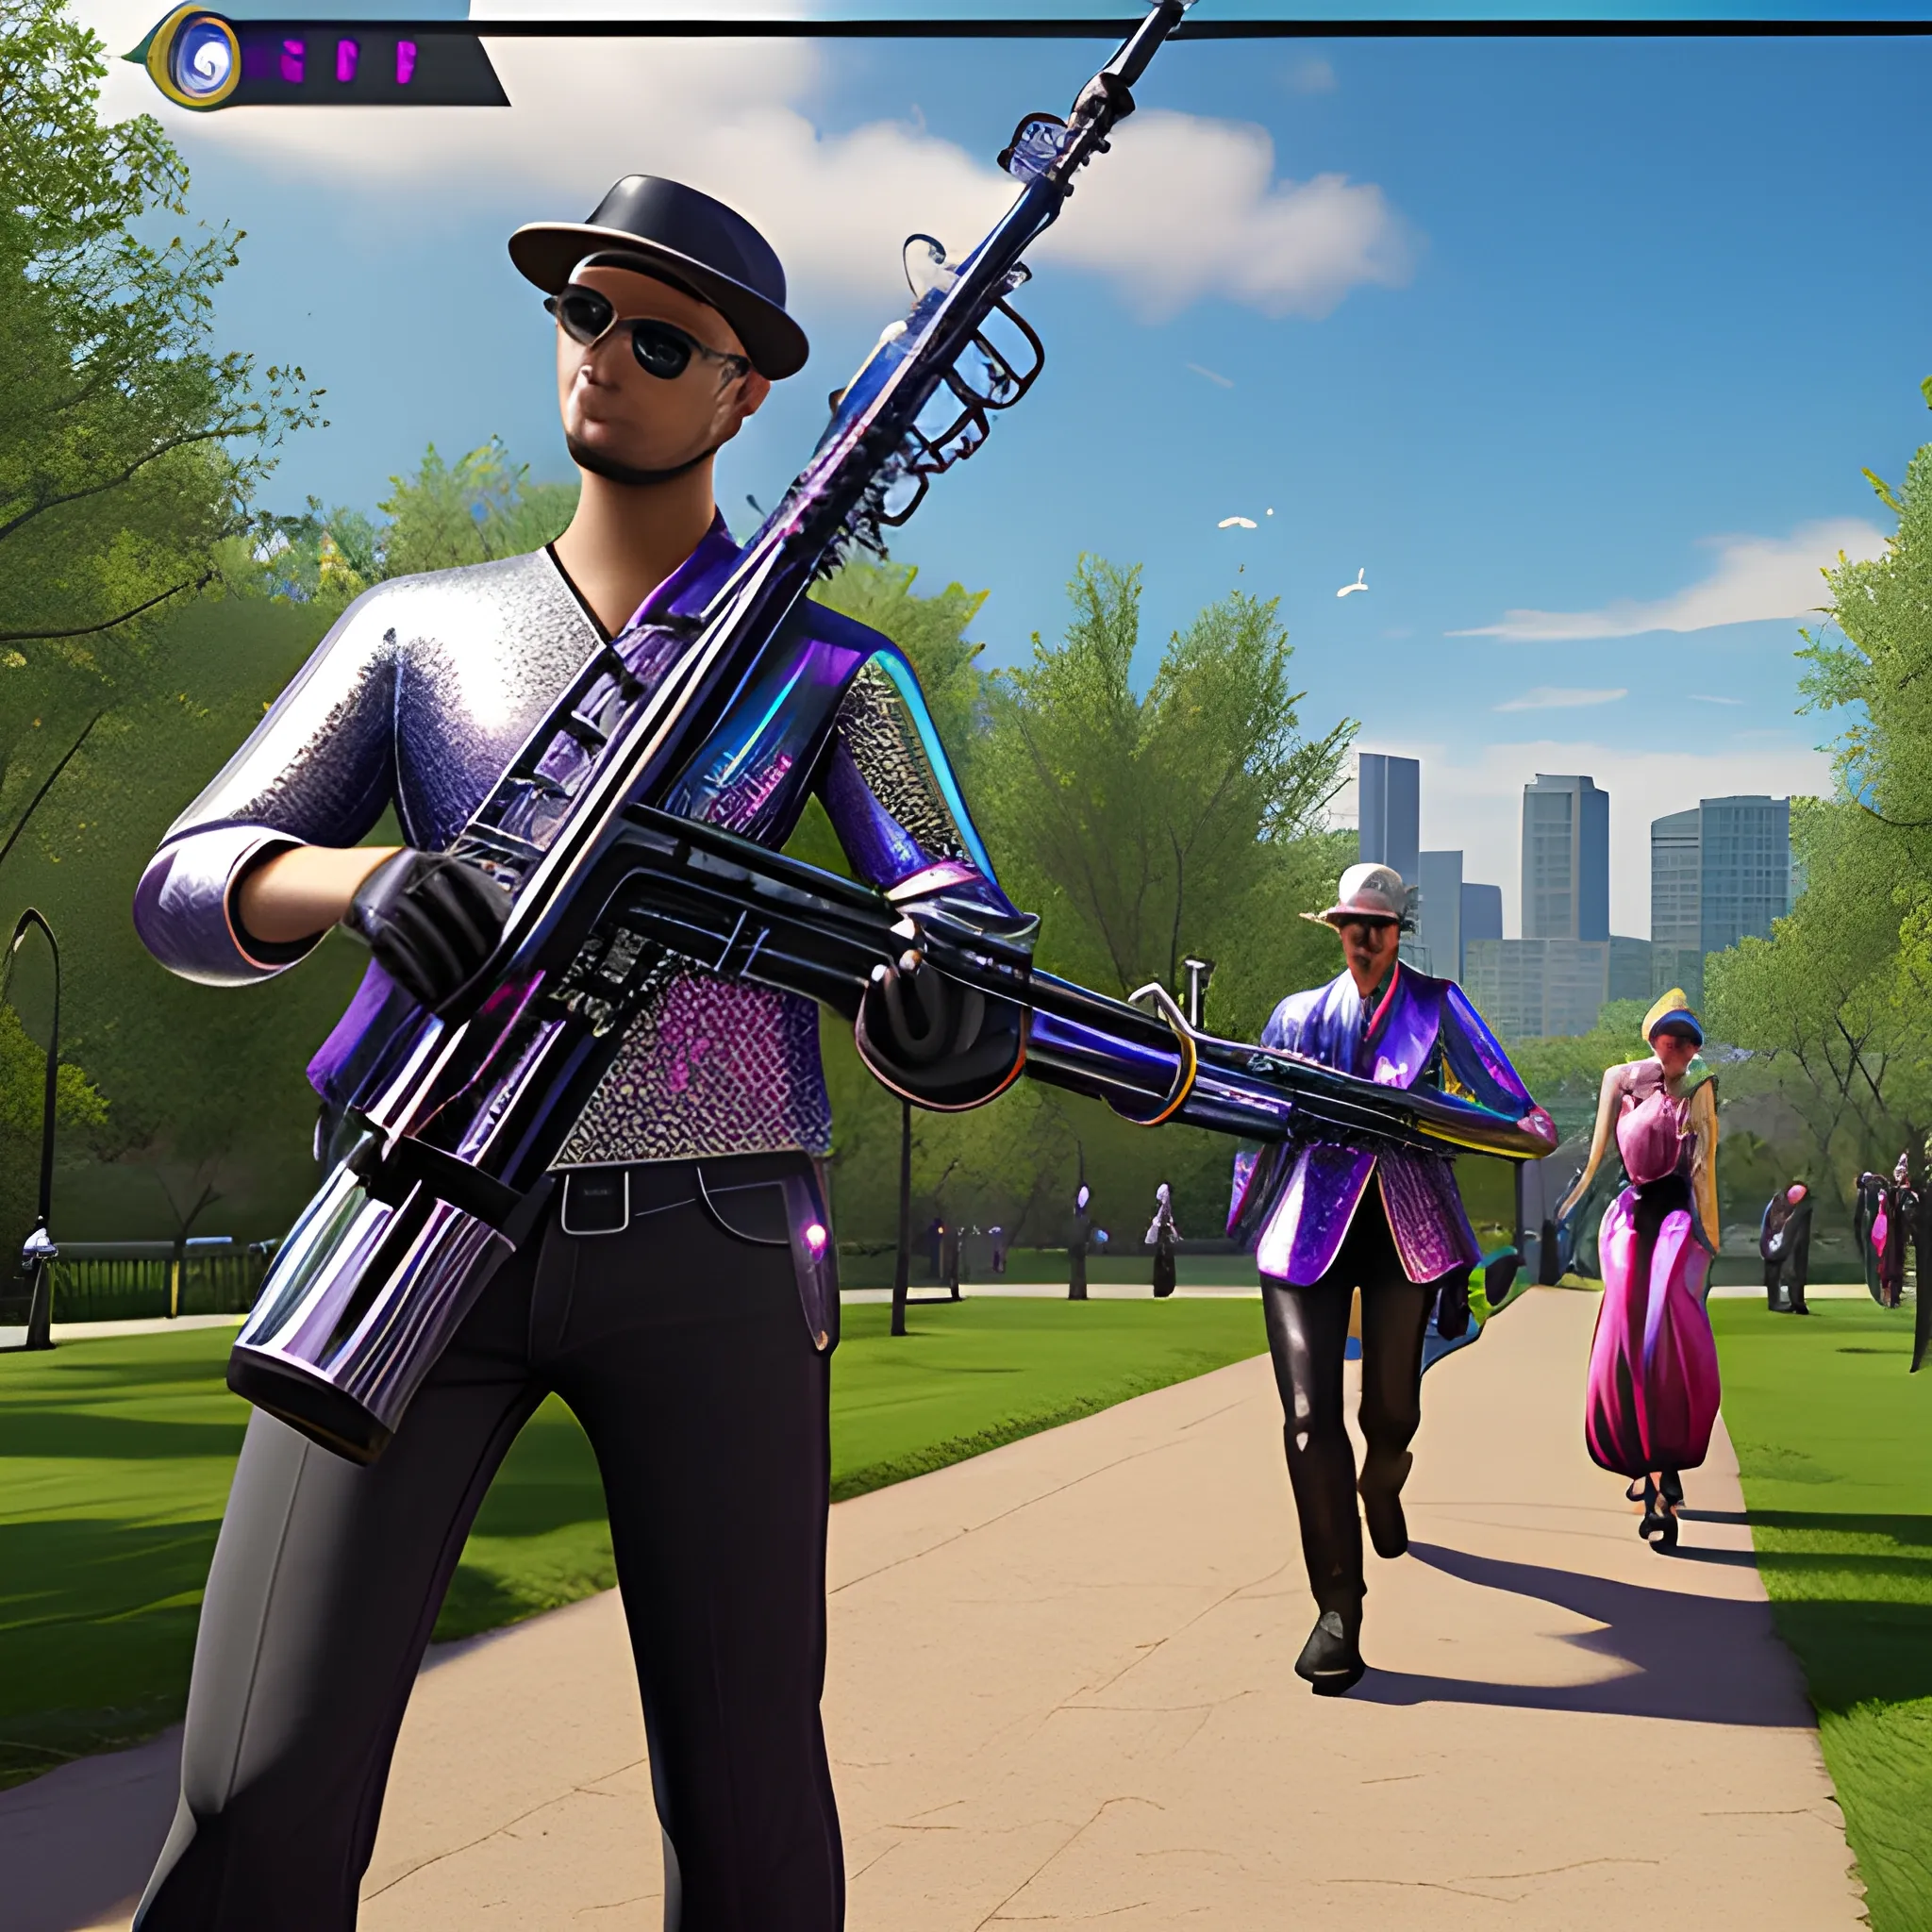 videogame screenshot of huge spangly sparkly double bassoon assault rifle in foreground, with pedestrians walking dogs, in a municipal park, very detailed